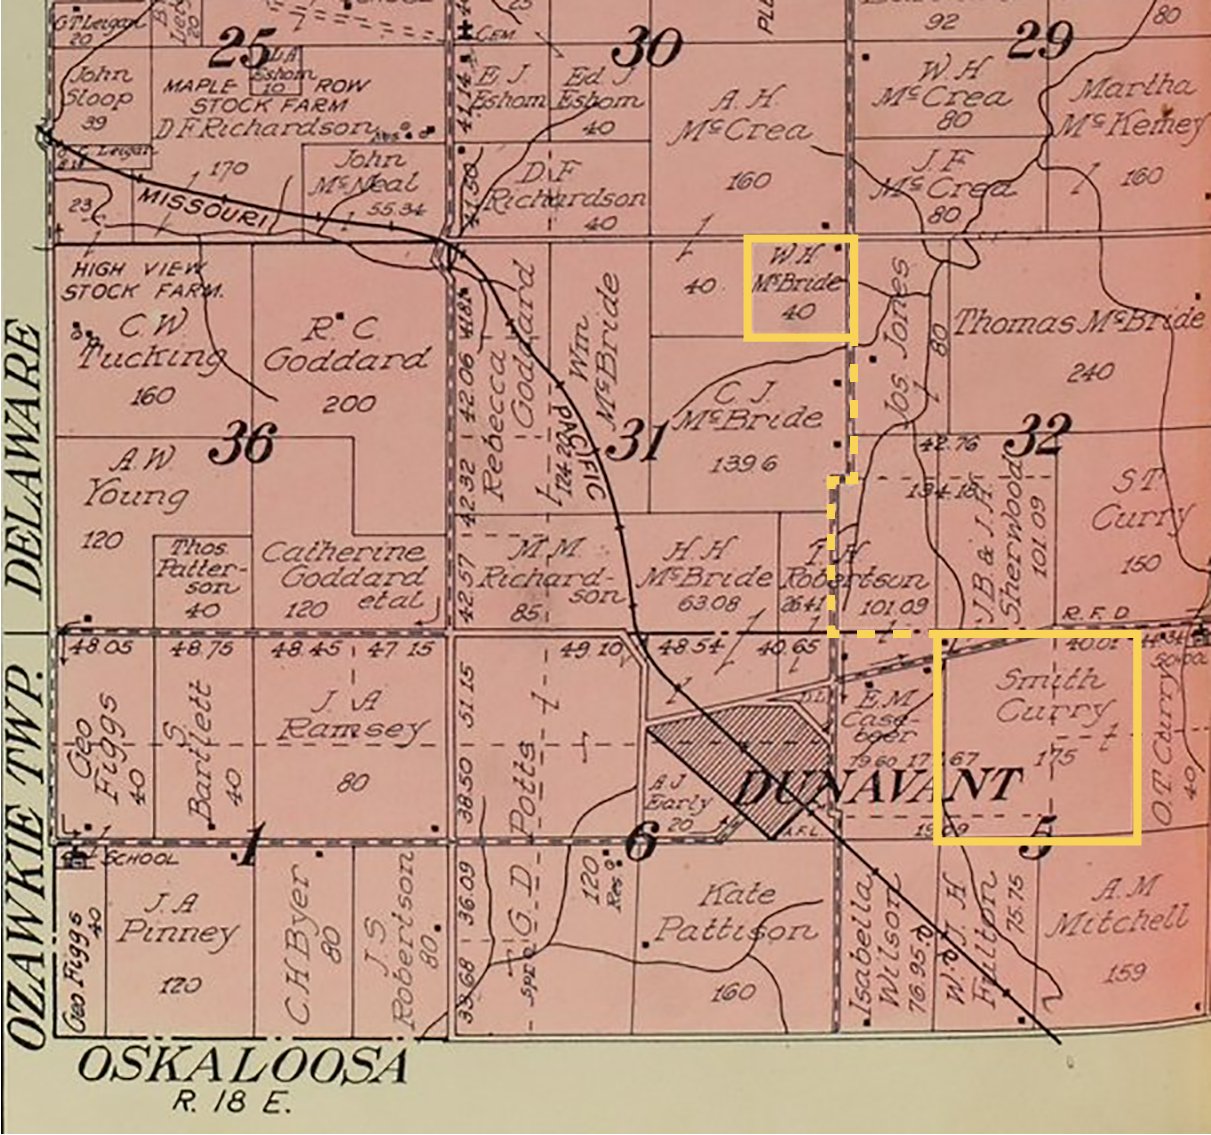 Detail of fig. 1, showing red highlight around properties labeled "W. H. McBride" and "Smith Curry," with a dotted yellow line connecting them.